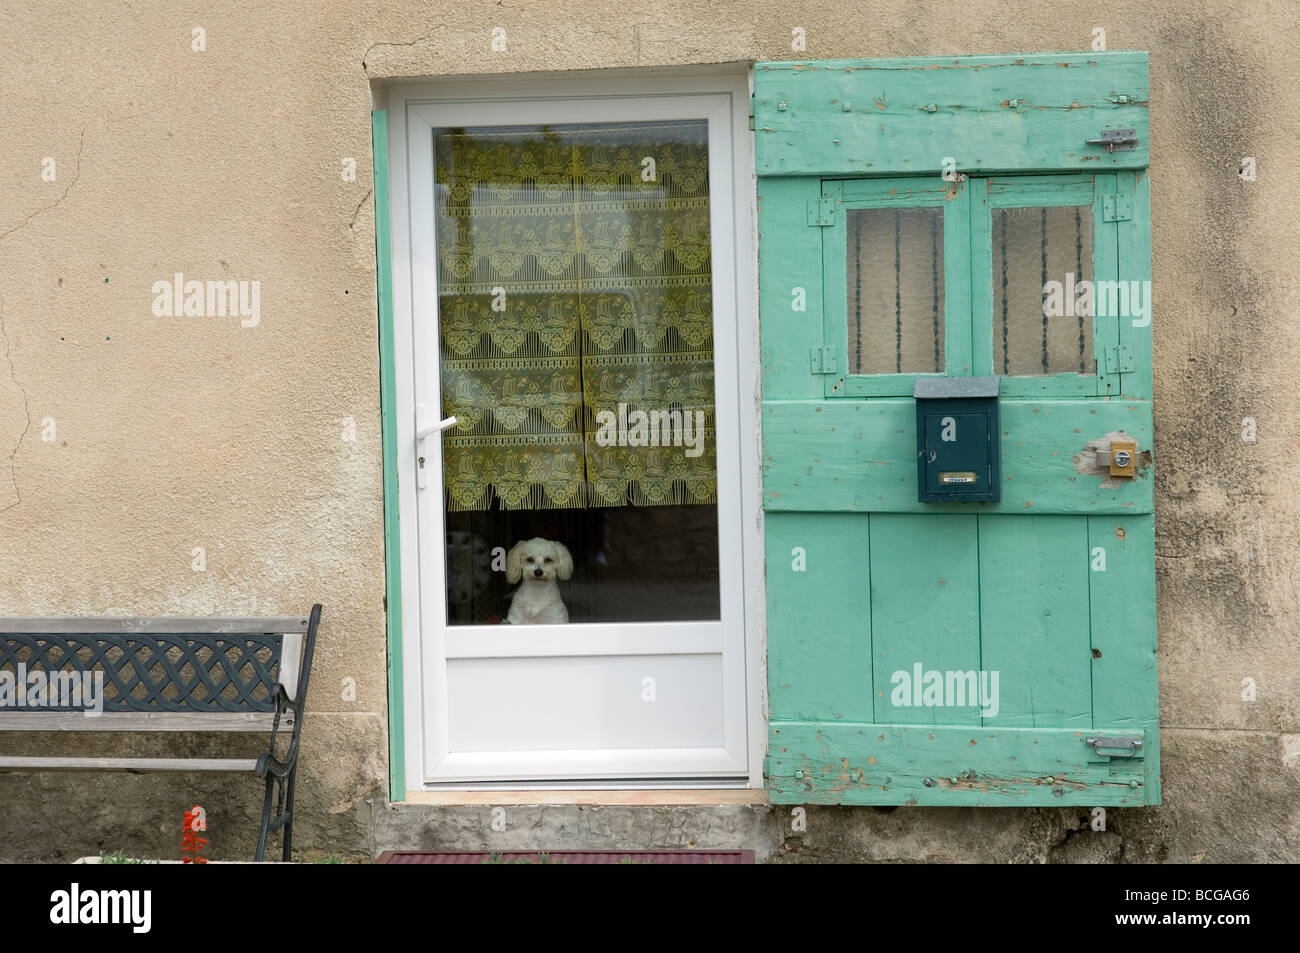 A white Poodle dog looks out from a front door window. Sault, Provence, France Stock Photo